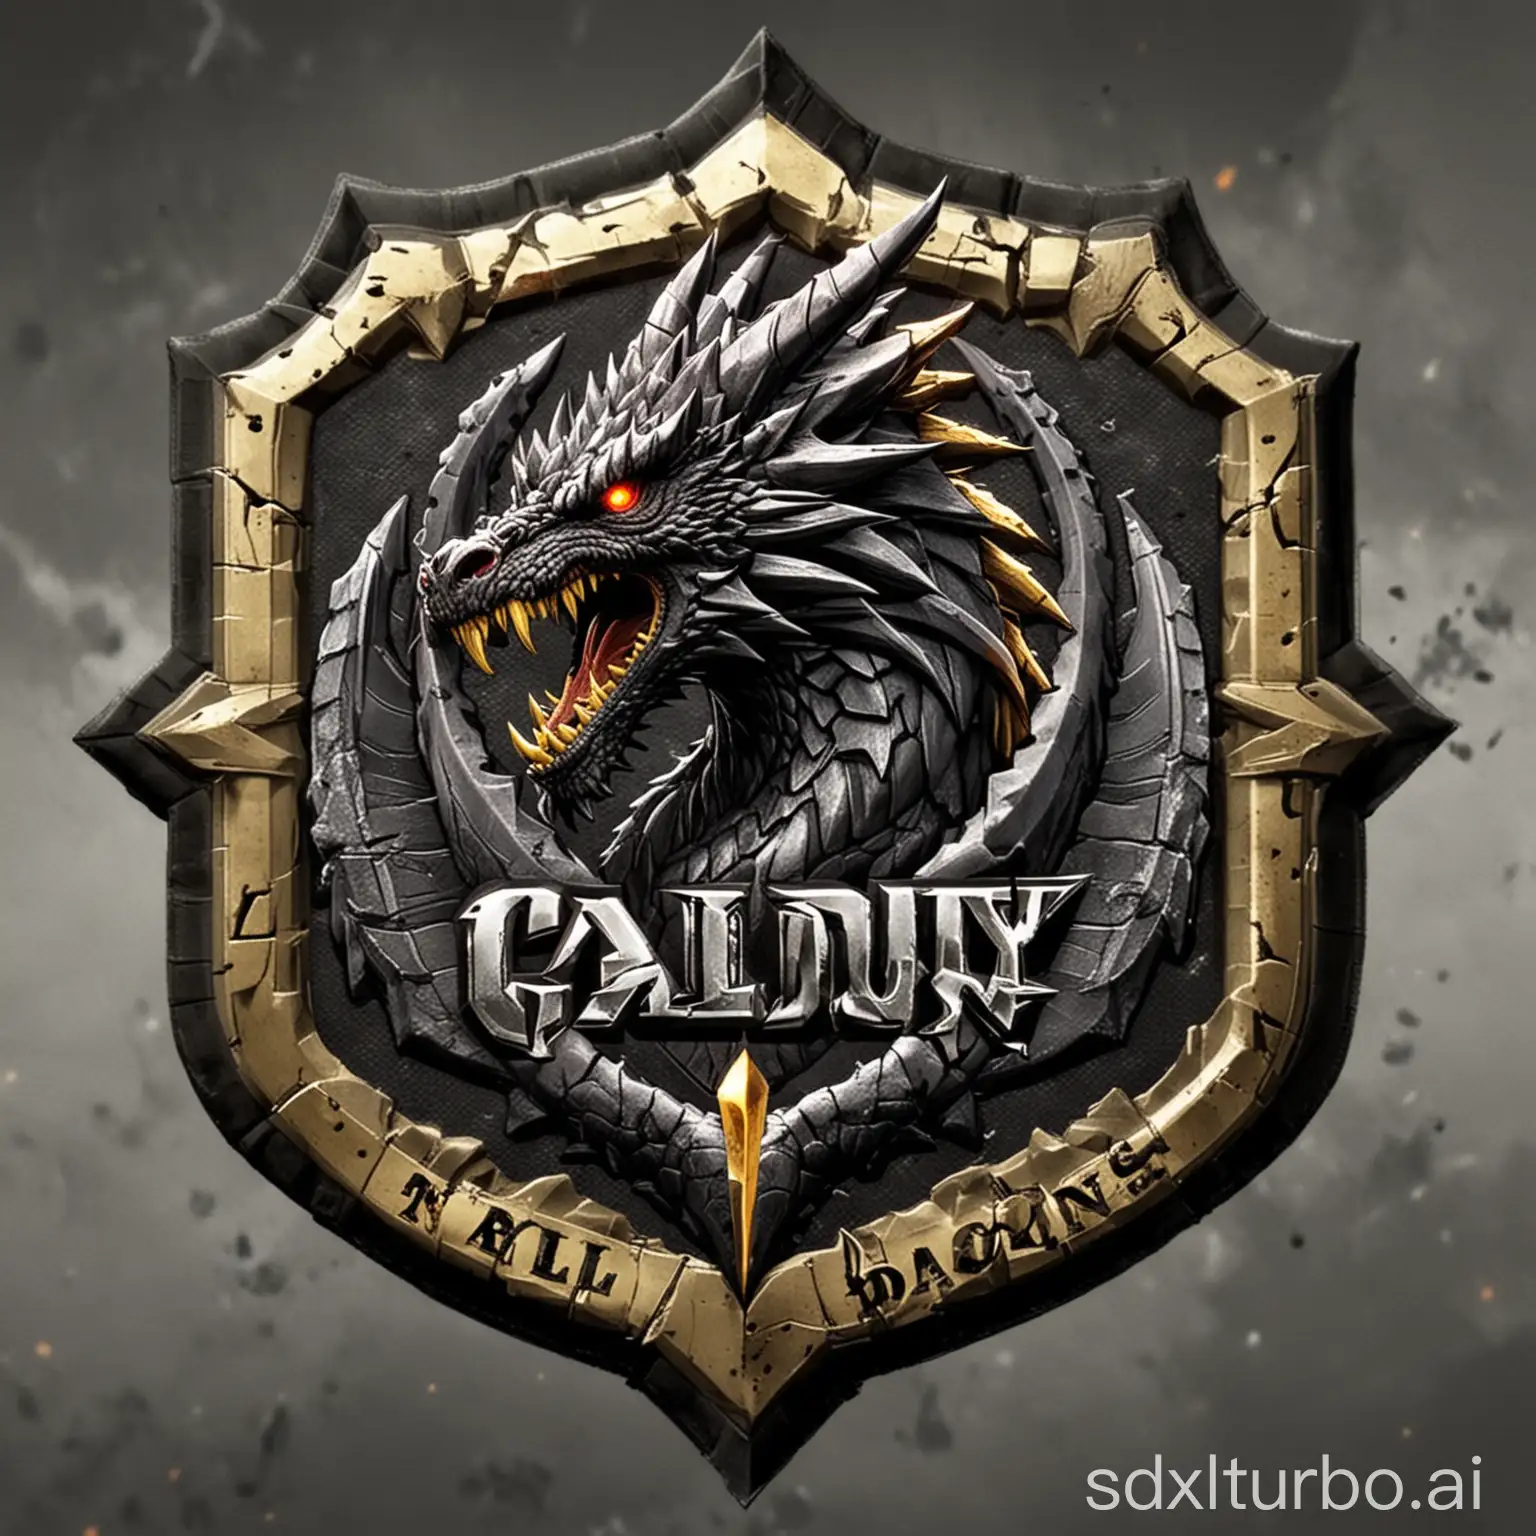 I have a clan in the game call of duty mobile named dusk & dragons nLogo is a military patch about dragons with the name of the clan